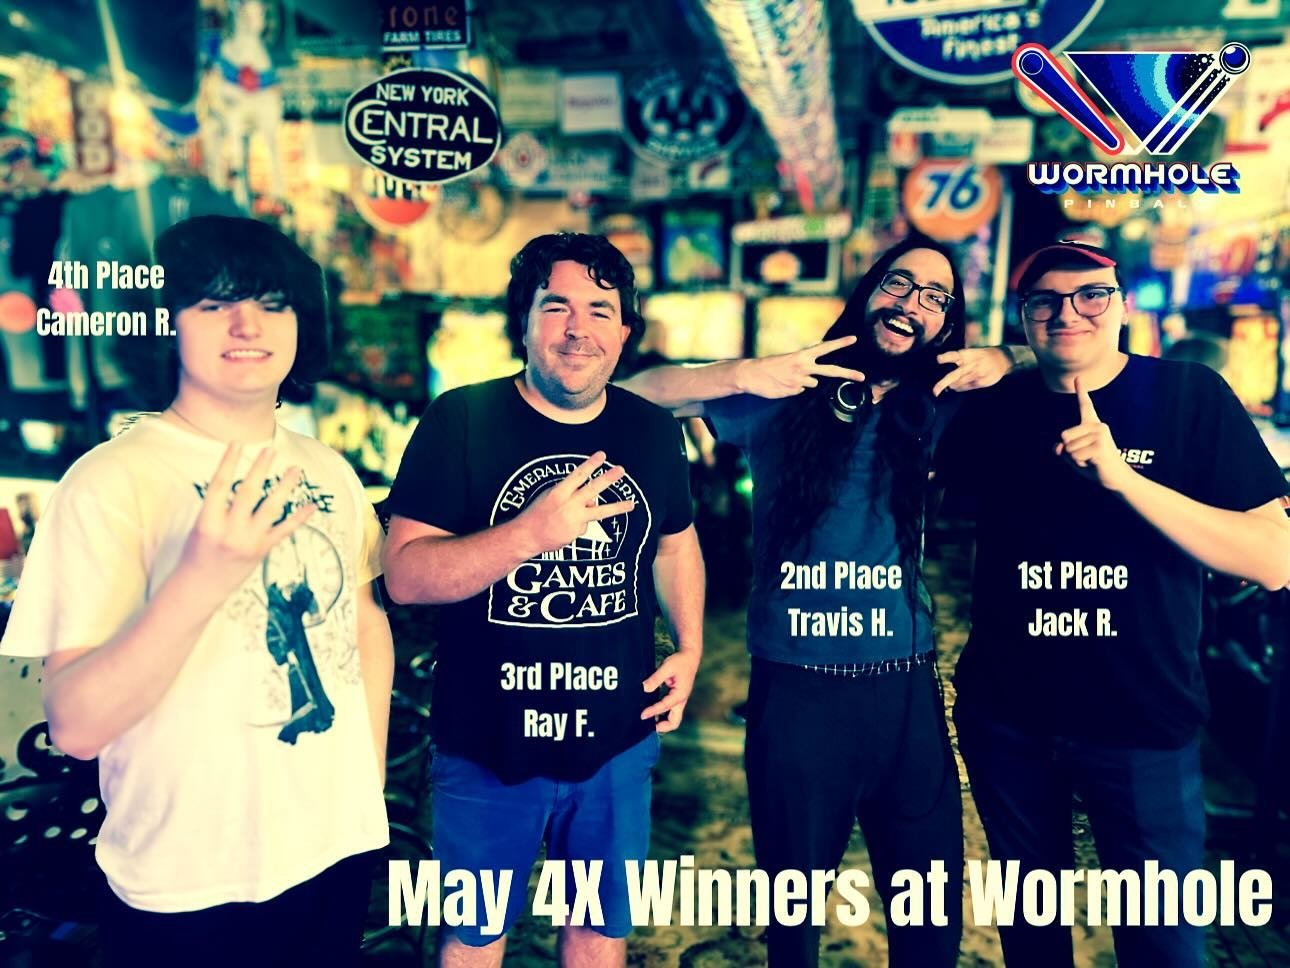 Our May 4X winners!  Take a bow boys